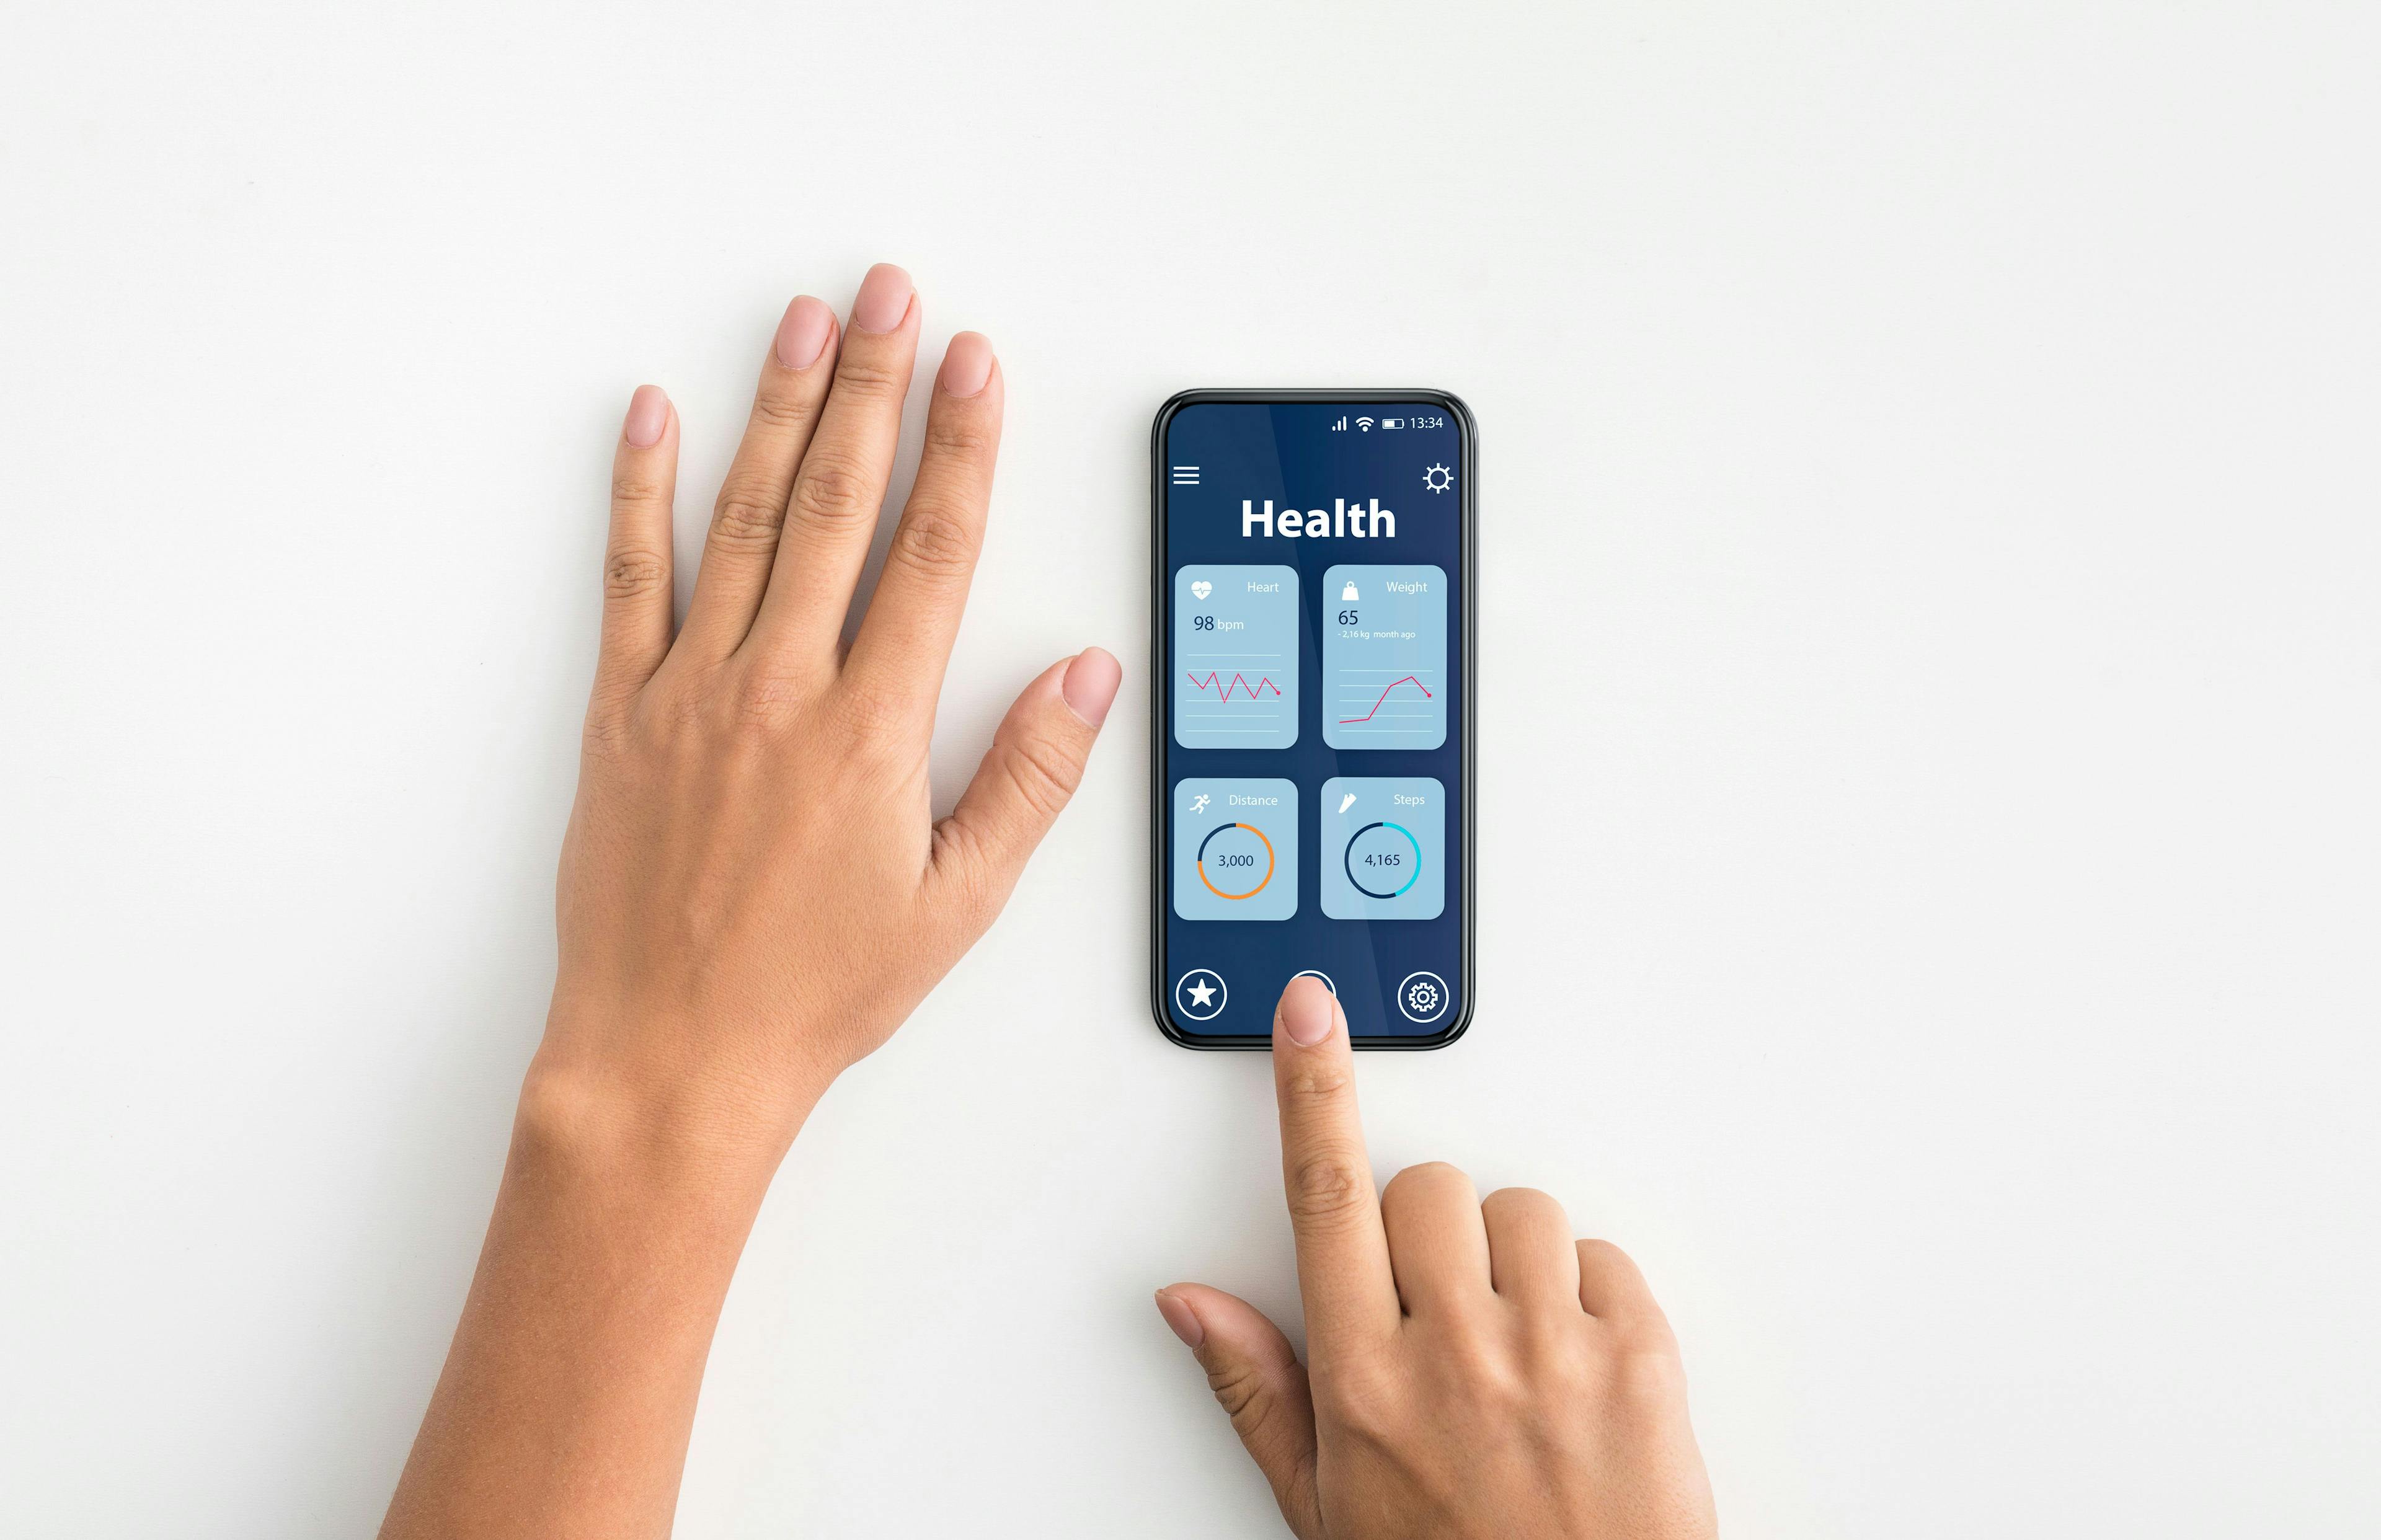 Diabetes and Digital Health Interventions: They Look To Be a Match